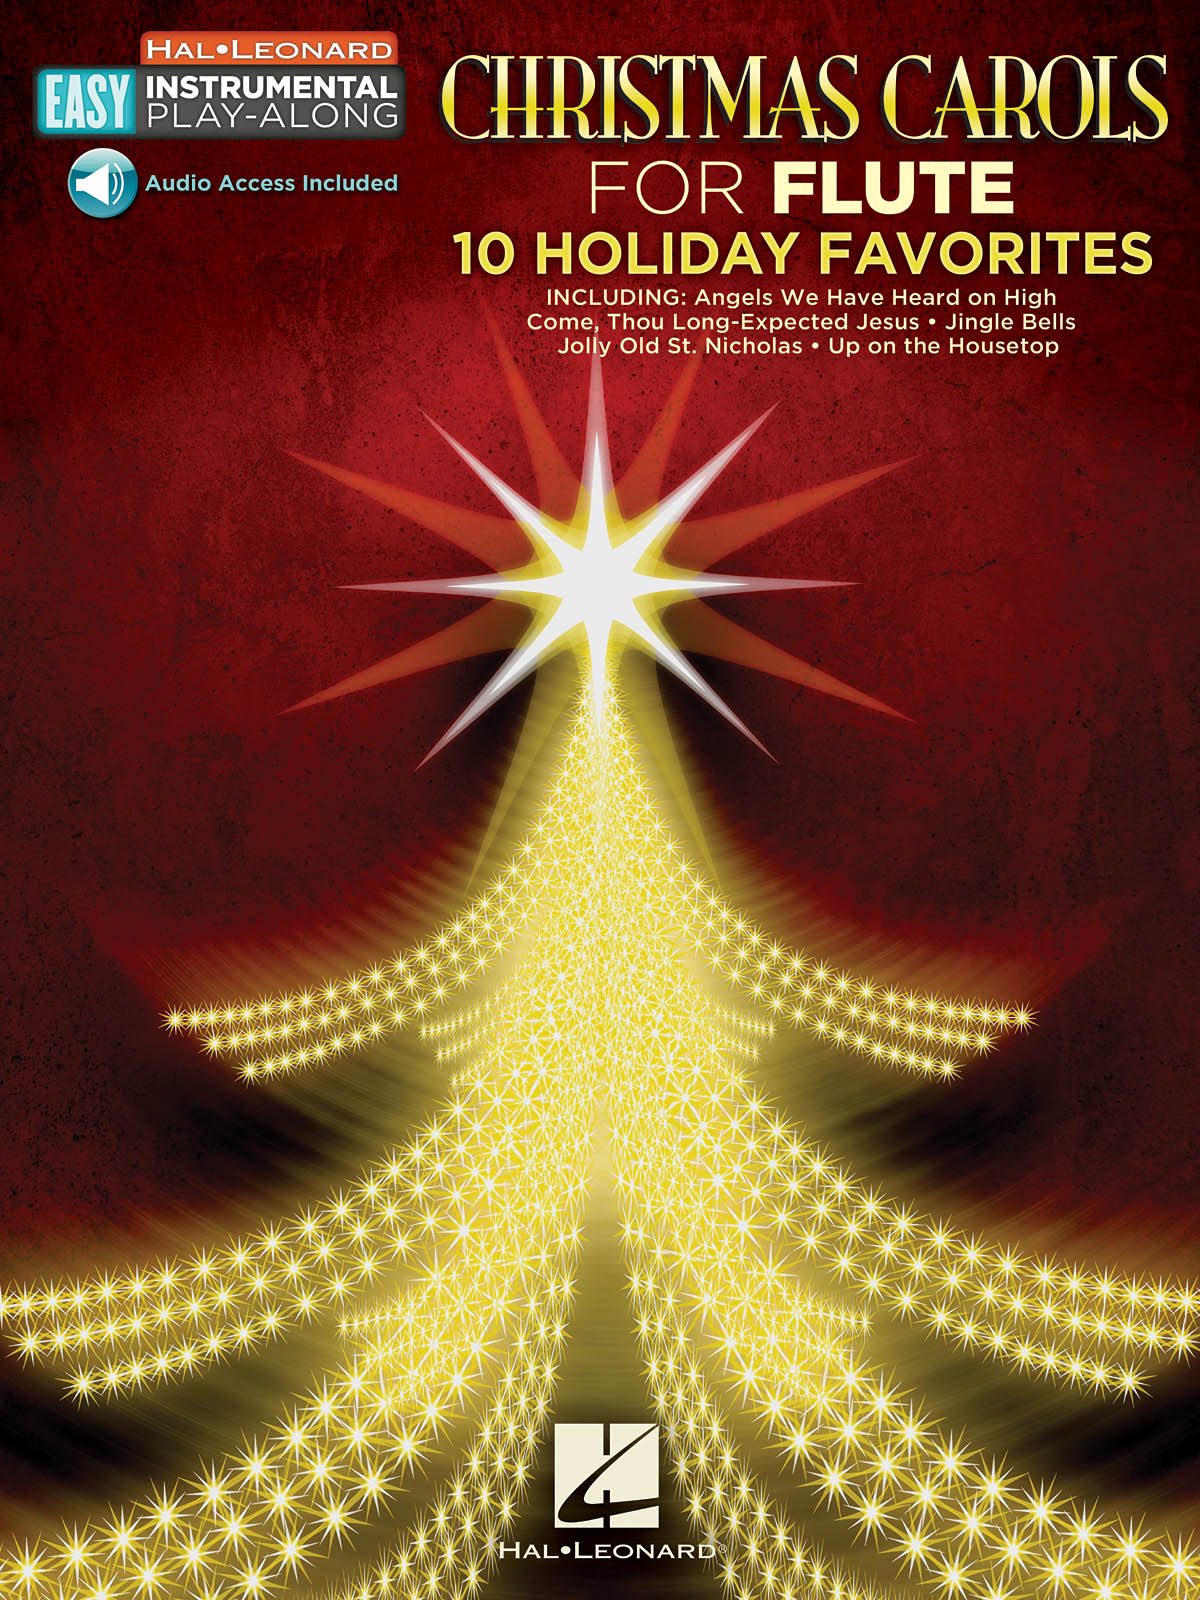 Christmas Carols - Flute: 10 Holiday Favorites - Easy Instrumental Play-Along Book with Online Audio Tracks - noty na flétnu